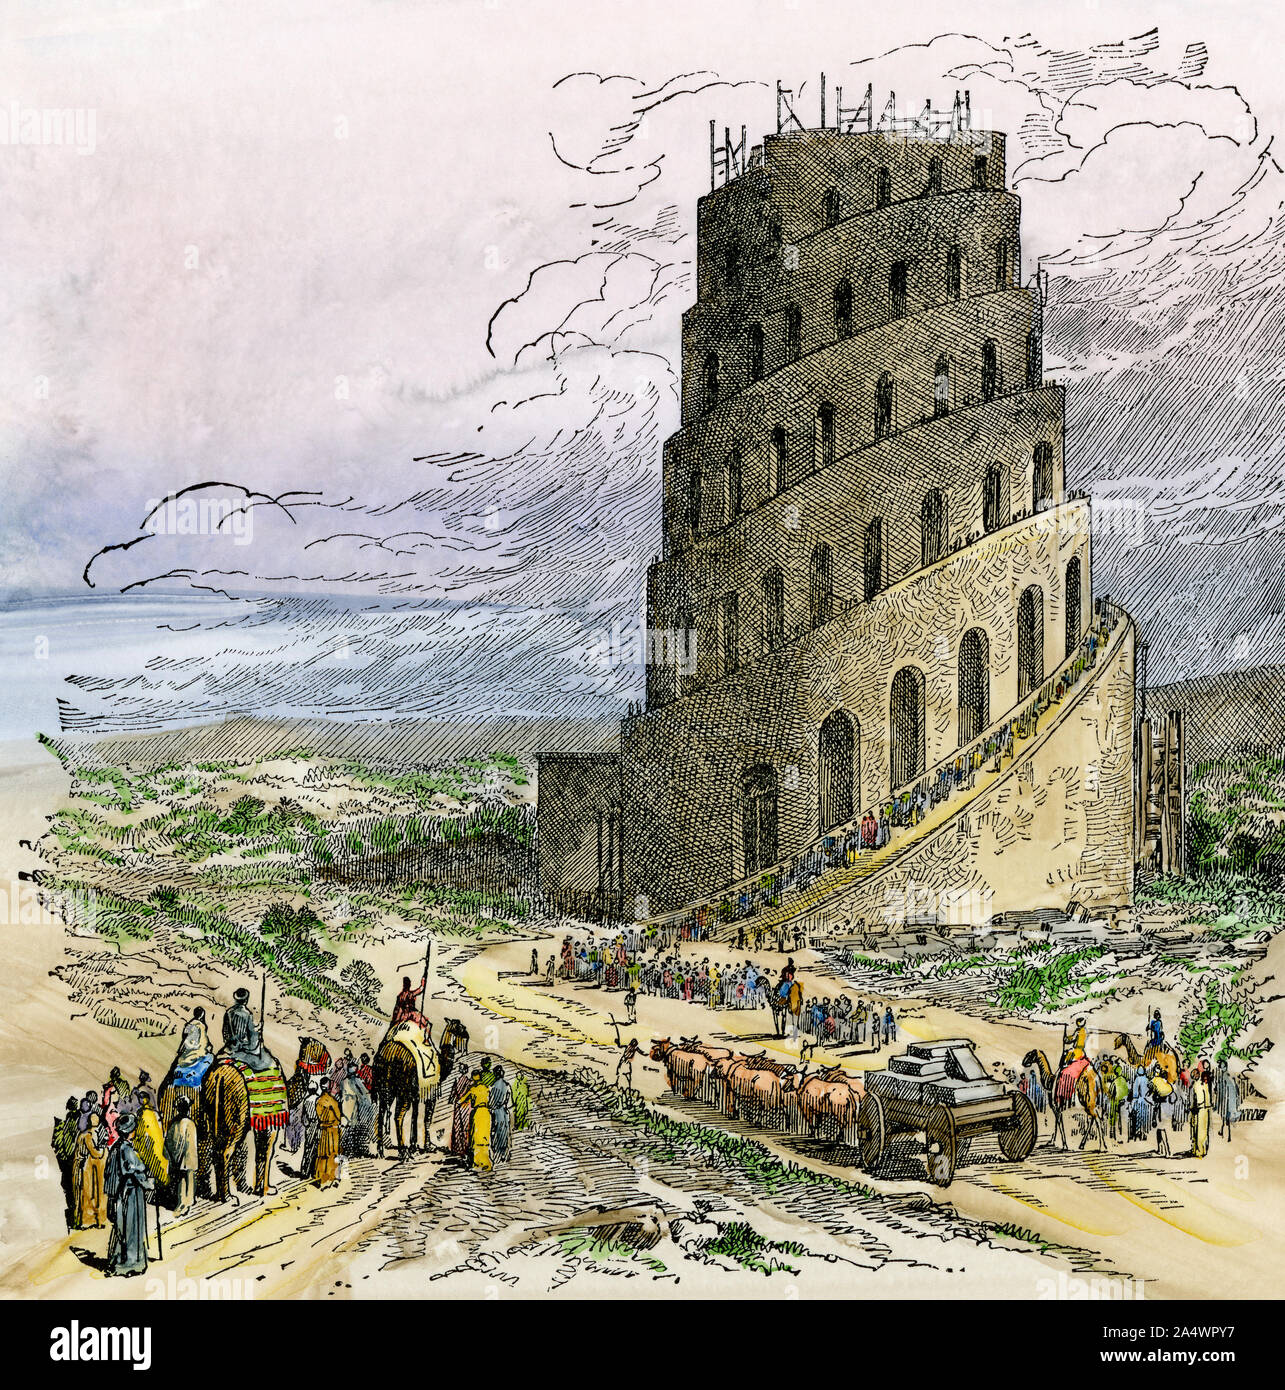 The Masters Collection The Tower of Babel JP London TMC2000 Bruegel Prepasted Removable Wall Mural 12 by 8.5-Feet 